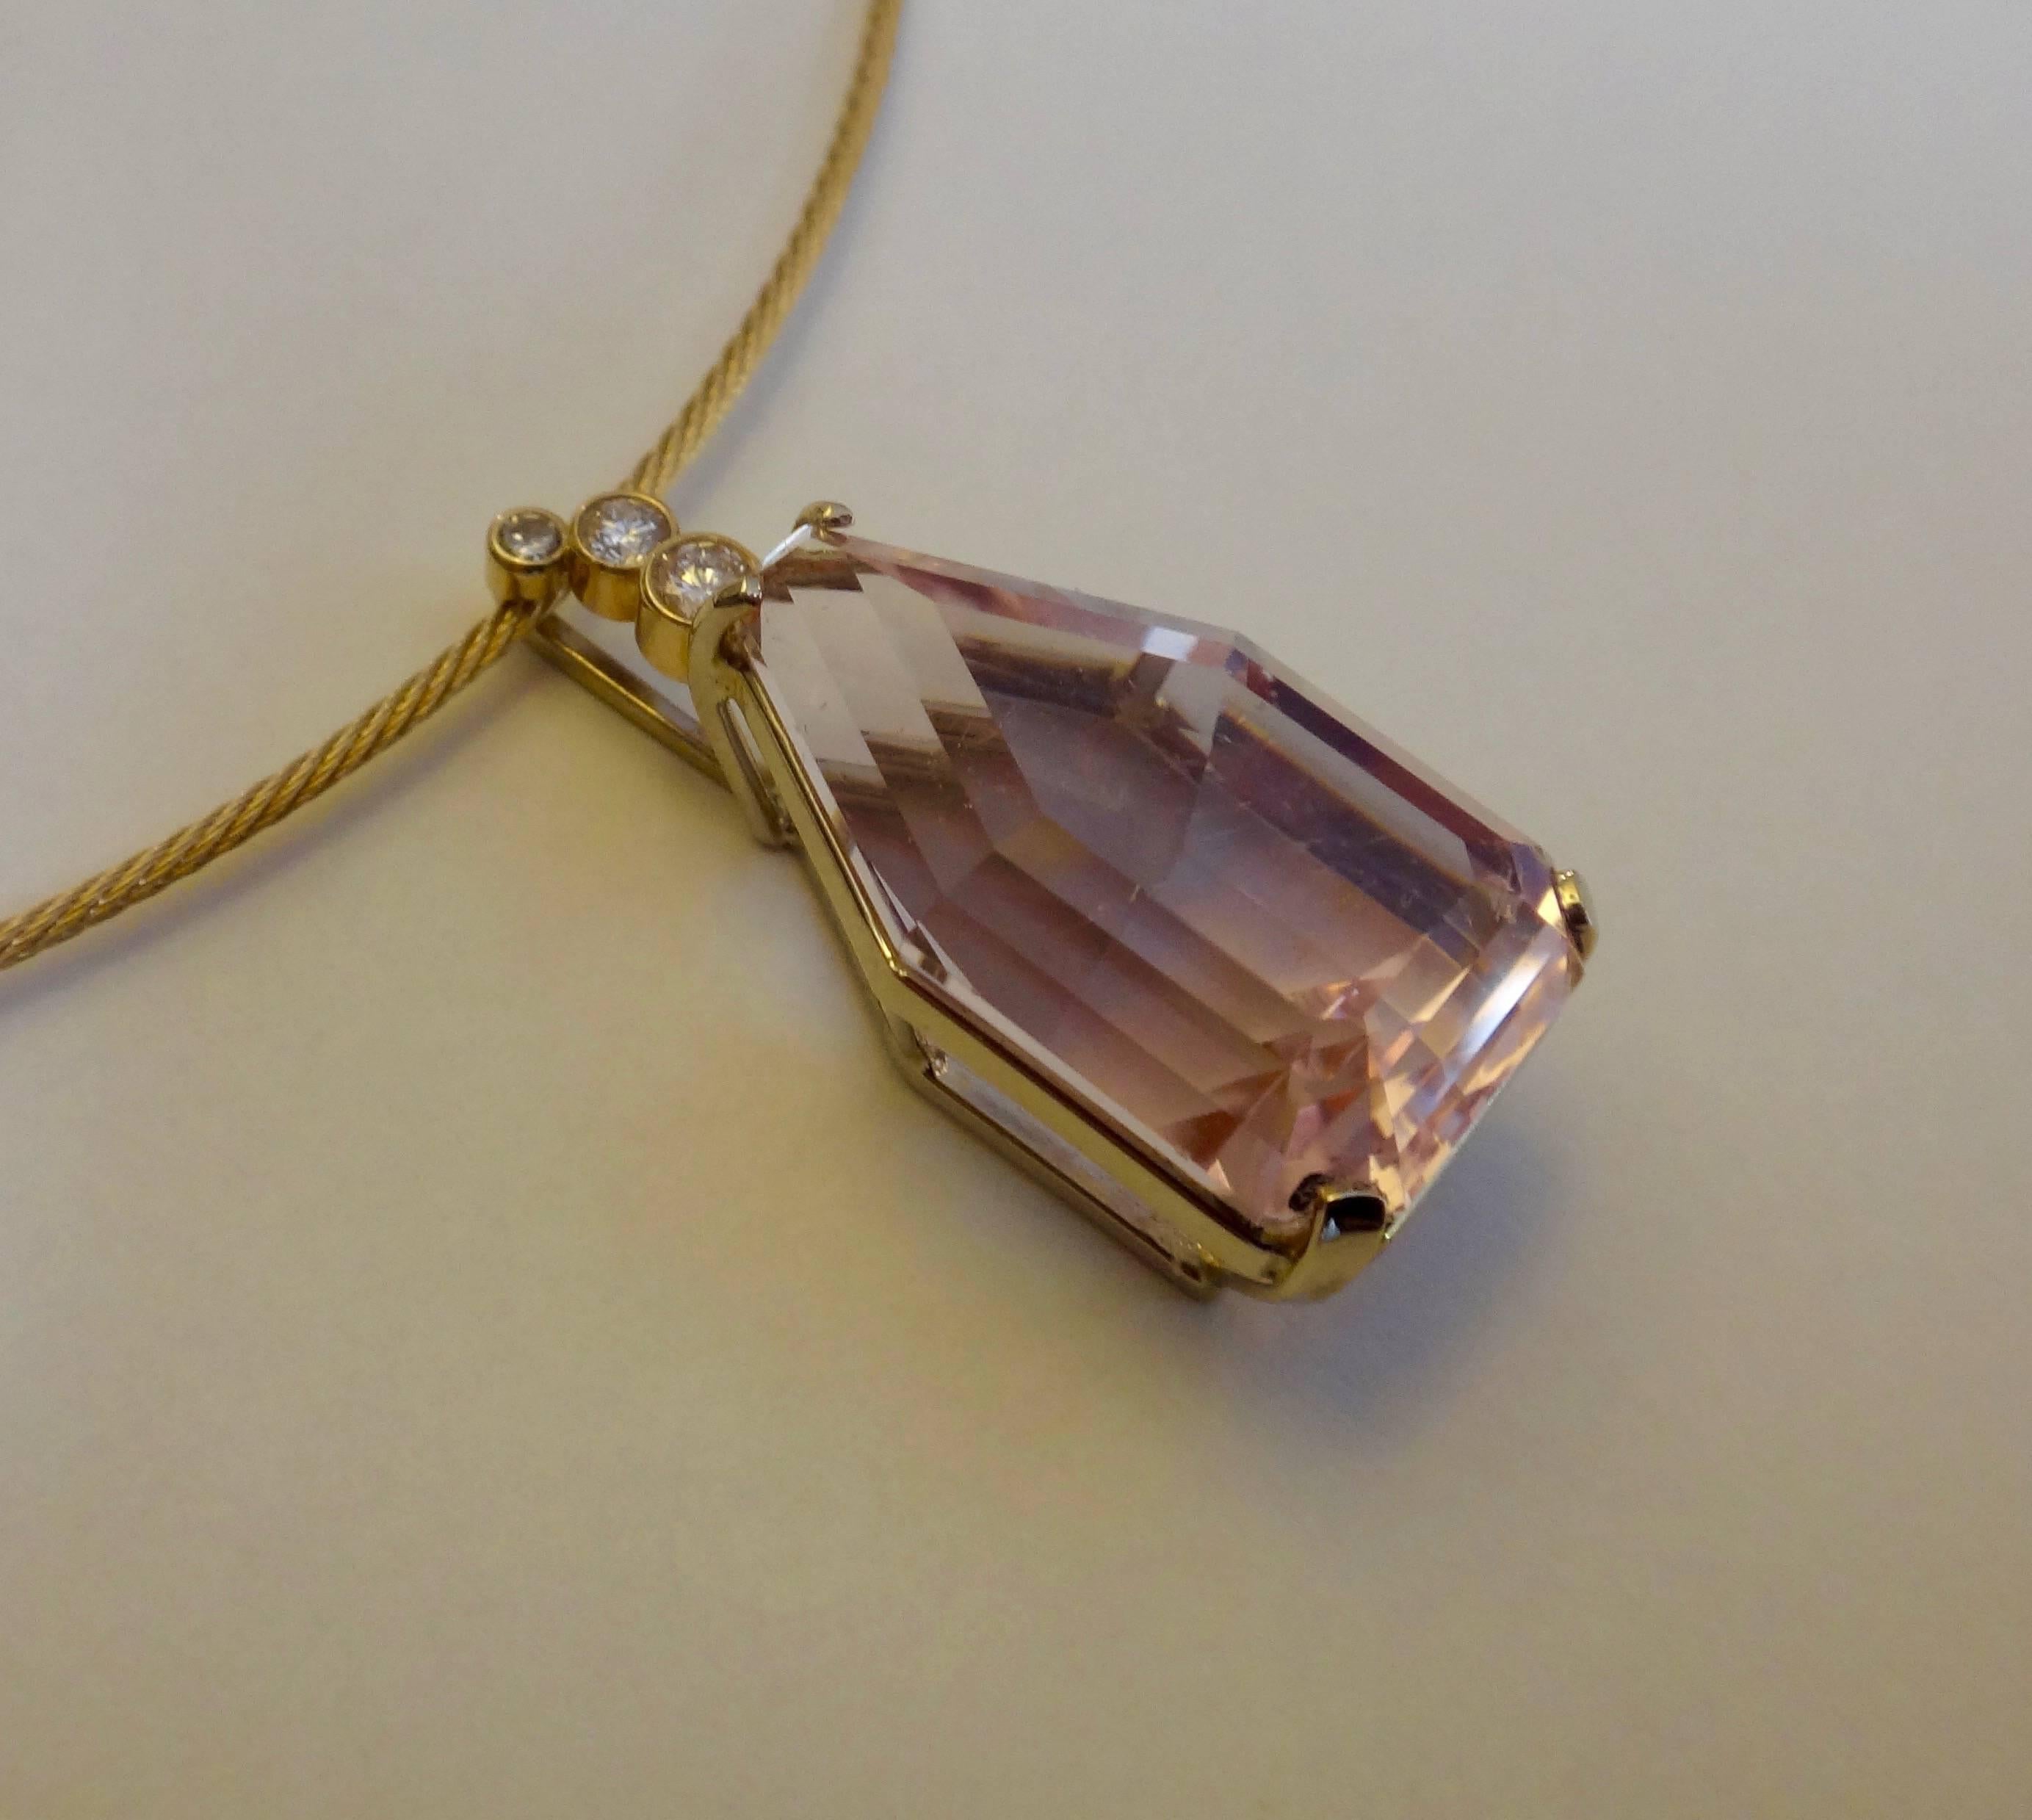 The rough Morganite (a form of beryl, sister stones are aquamarine and emerald, among others) was collected in Namibia and custom cut by master gem cutter, Jerry Newman.  The shape of the rough crystal dictated the unique shape of this gem.  It is